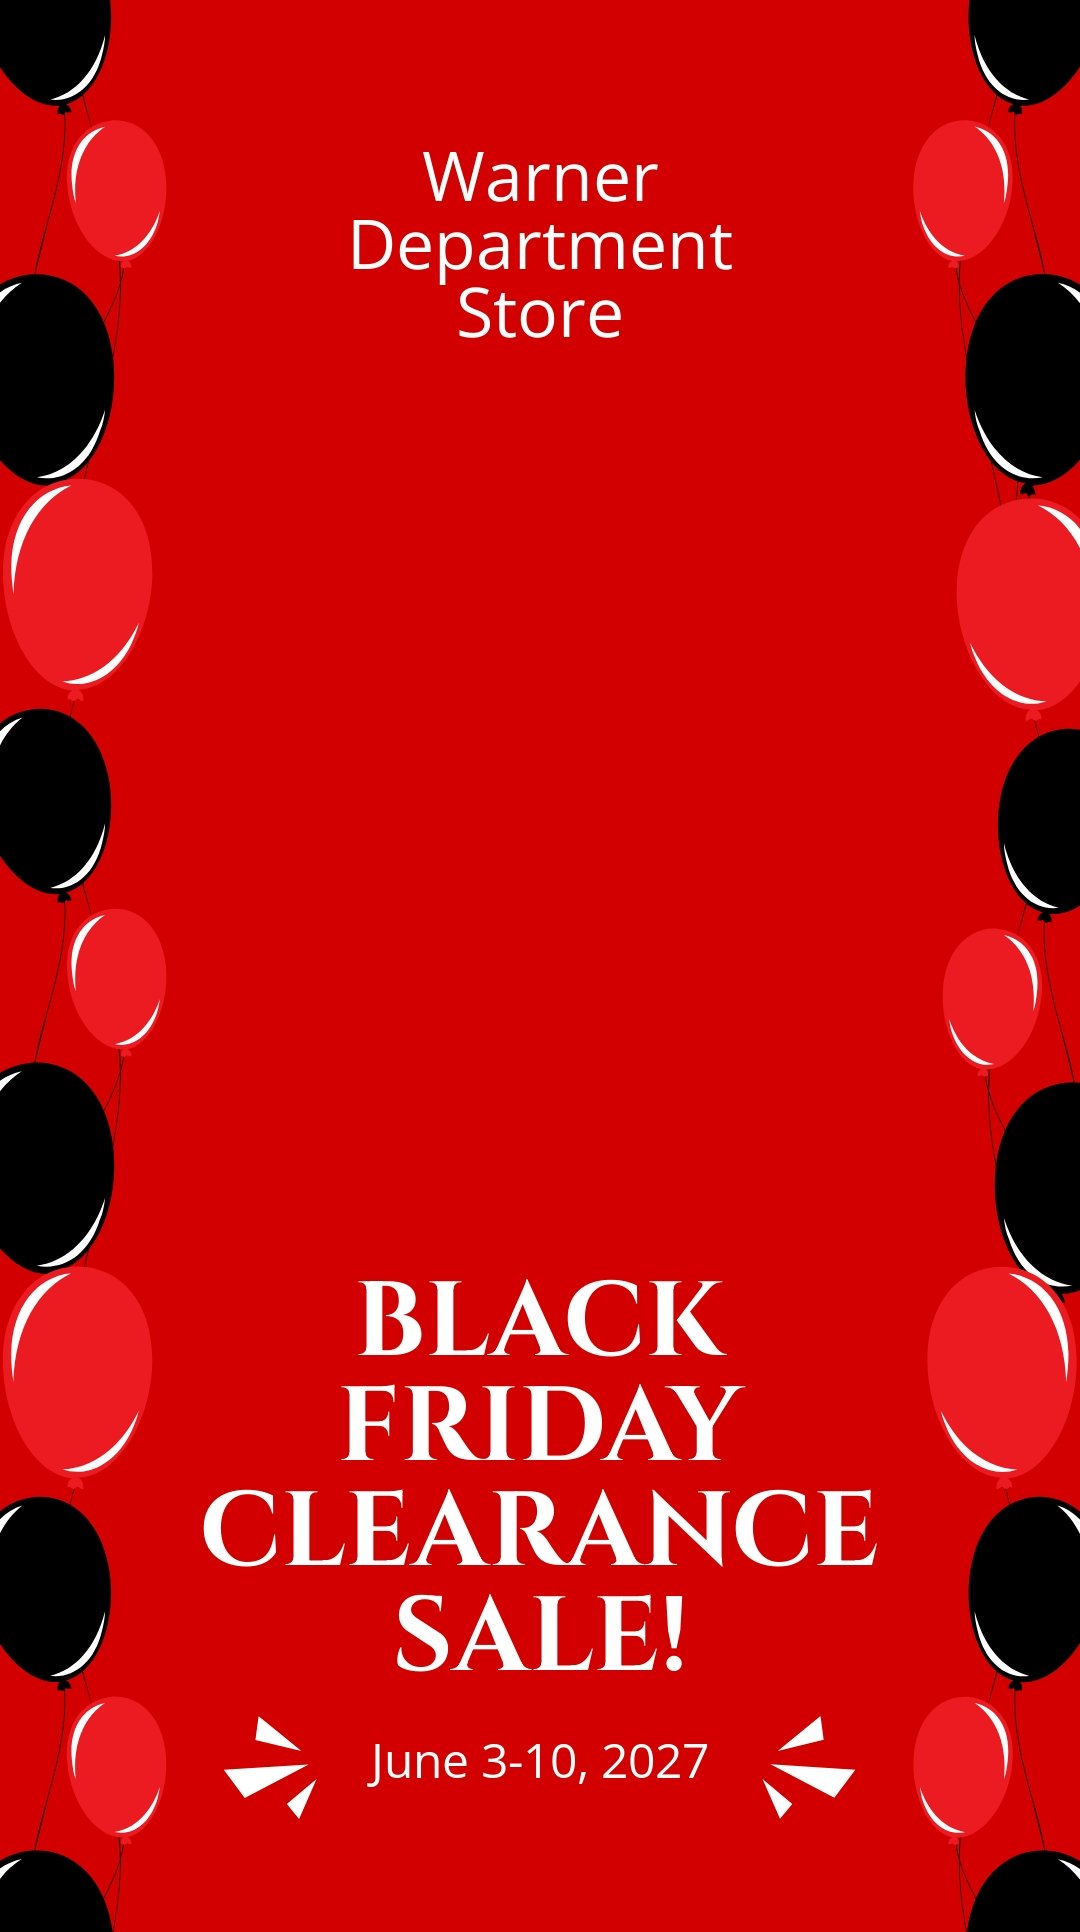 Free Black Friday Clearance Sale Snapchat Geofilter Template